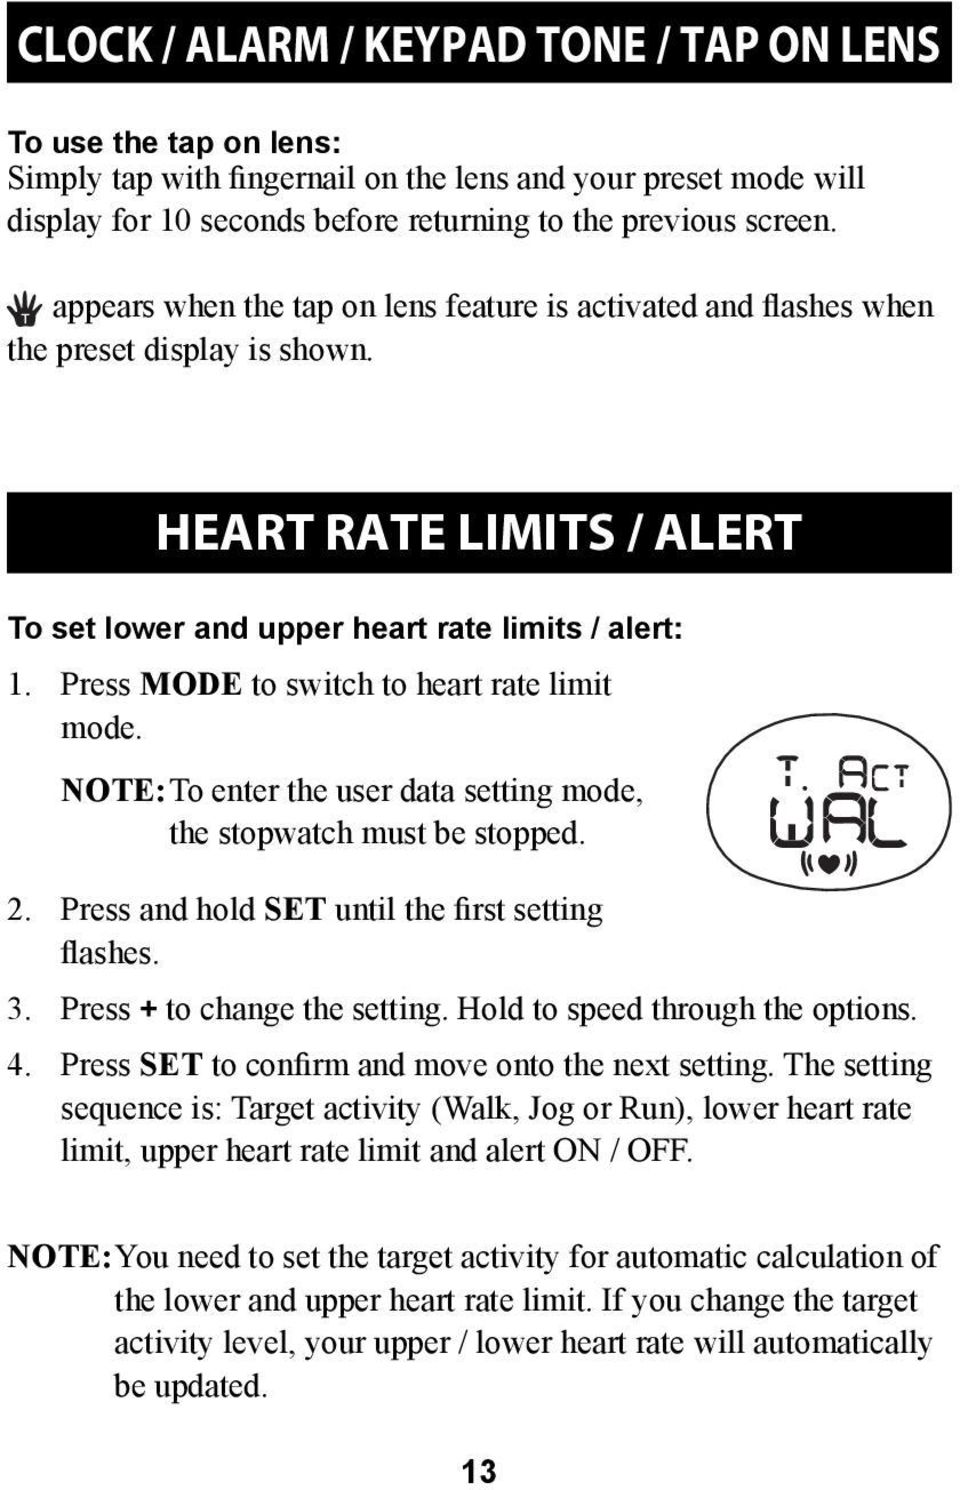 Press MODE to switch to heart rate limit mode. NOTE: To enter the user data setting mode, the stopwatch must be stopped. 2. Press and hold SET until the first setting flashes. 3.